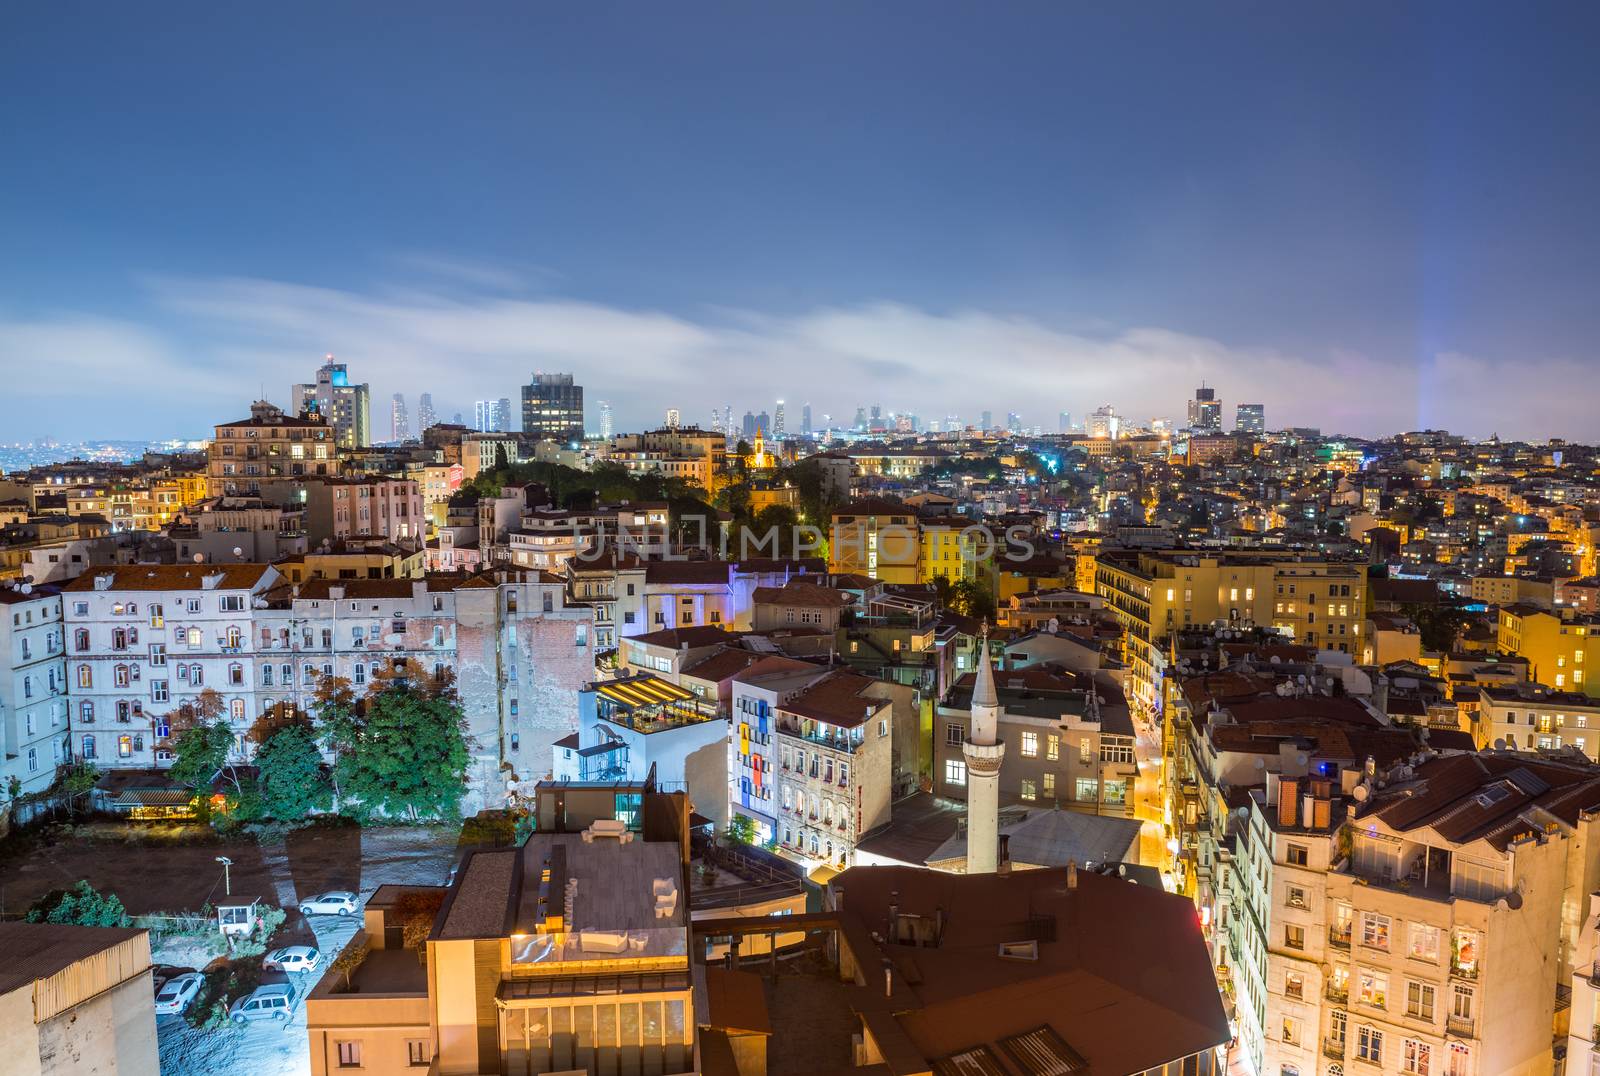 ISTANBUL - SEPTEMBER 17, 2014: City night panorama. Istanbul is by jovannig